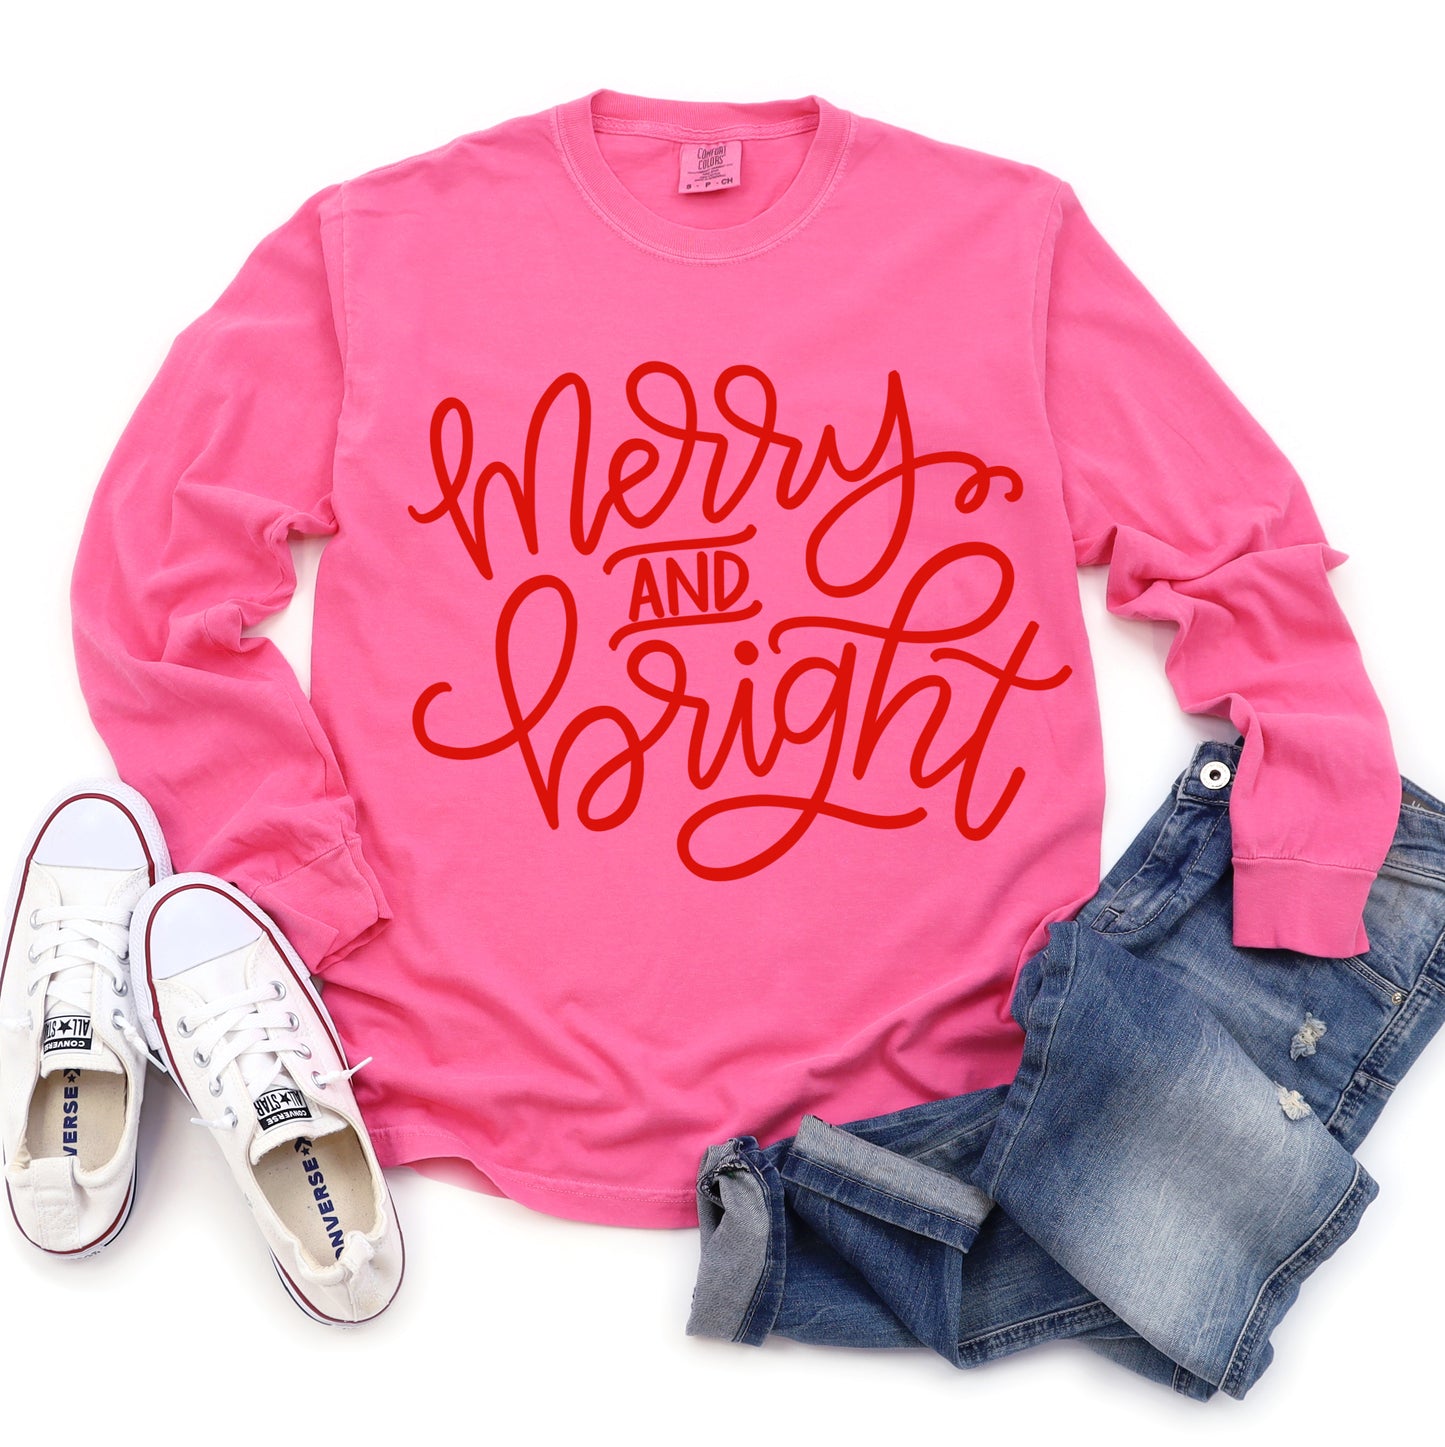 Comfort Colors Long Sleeved Pink Merry and Bright Tee -  Youth and Adult Sizes - Christmas Shirt